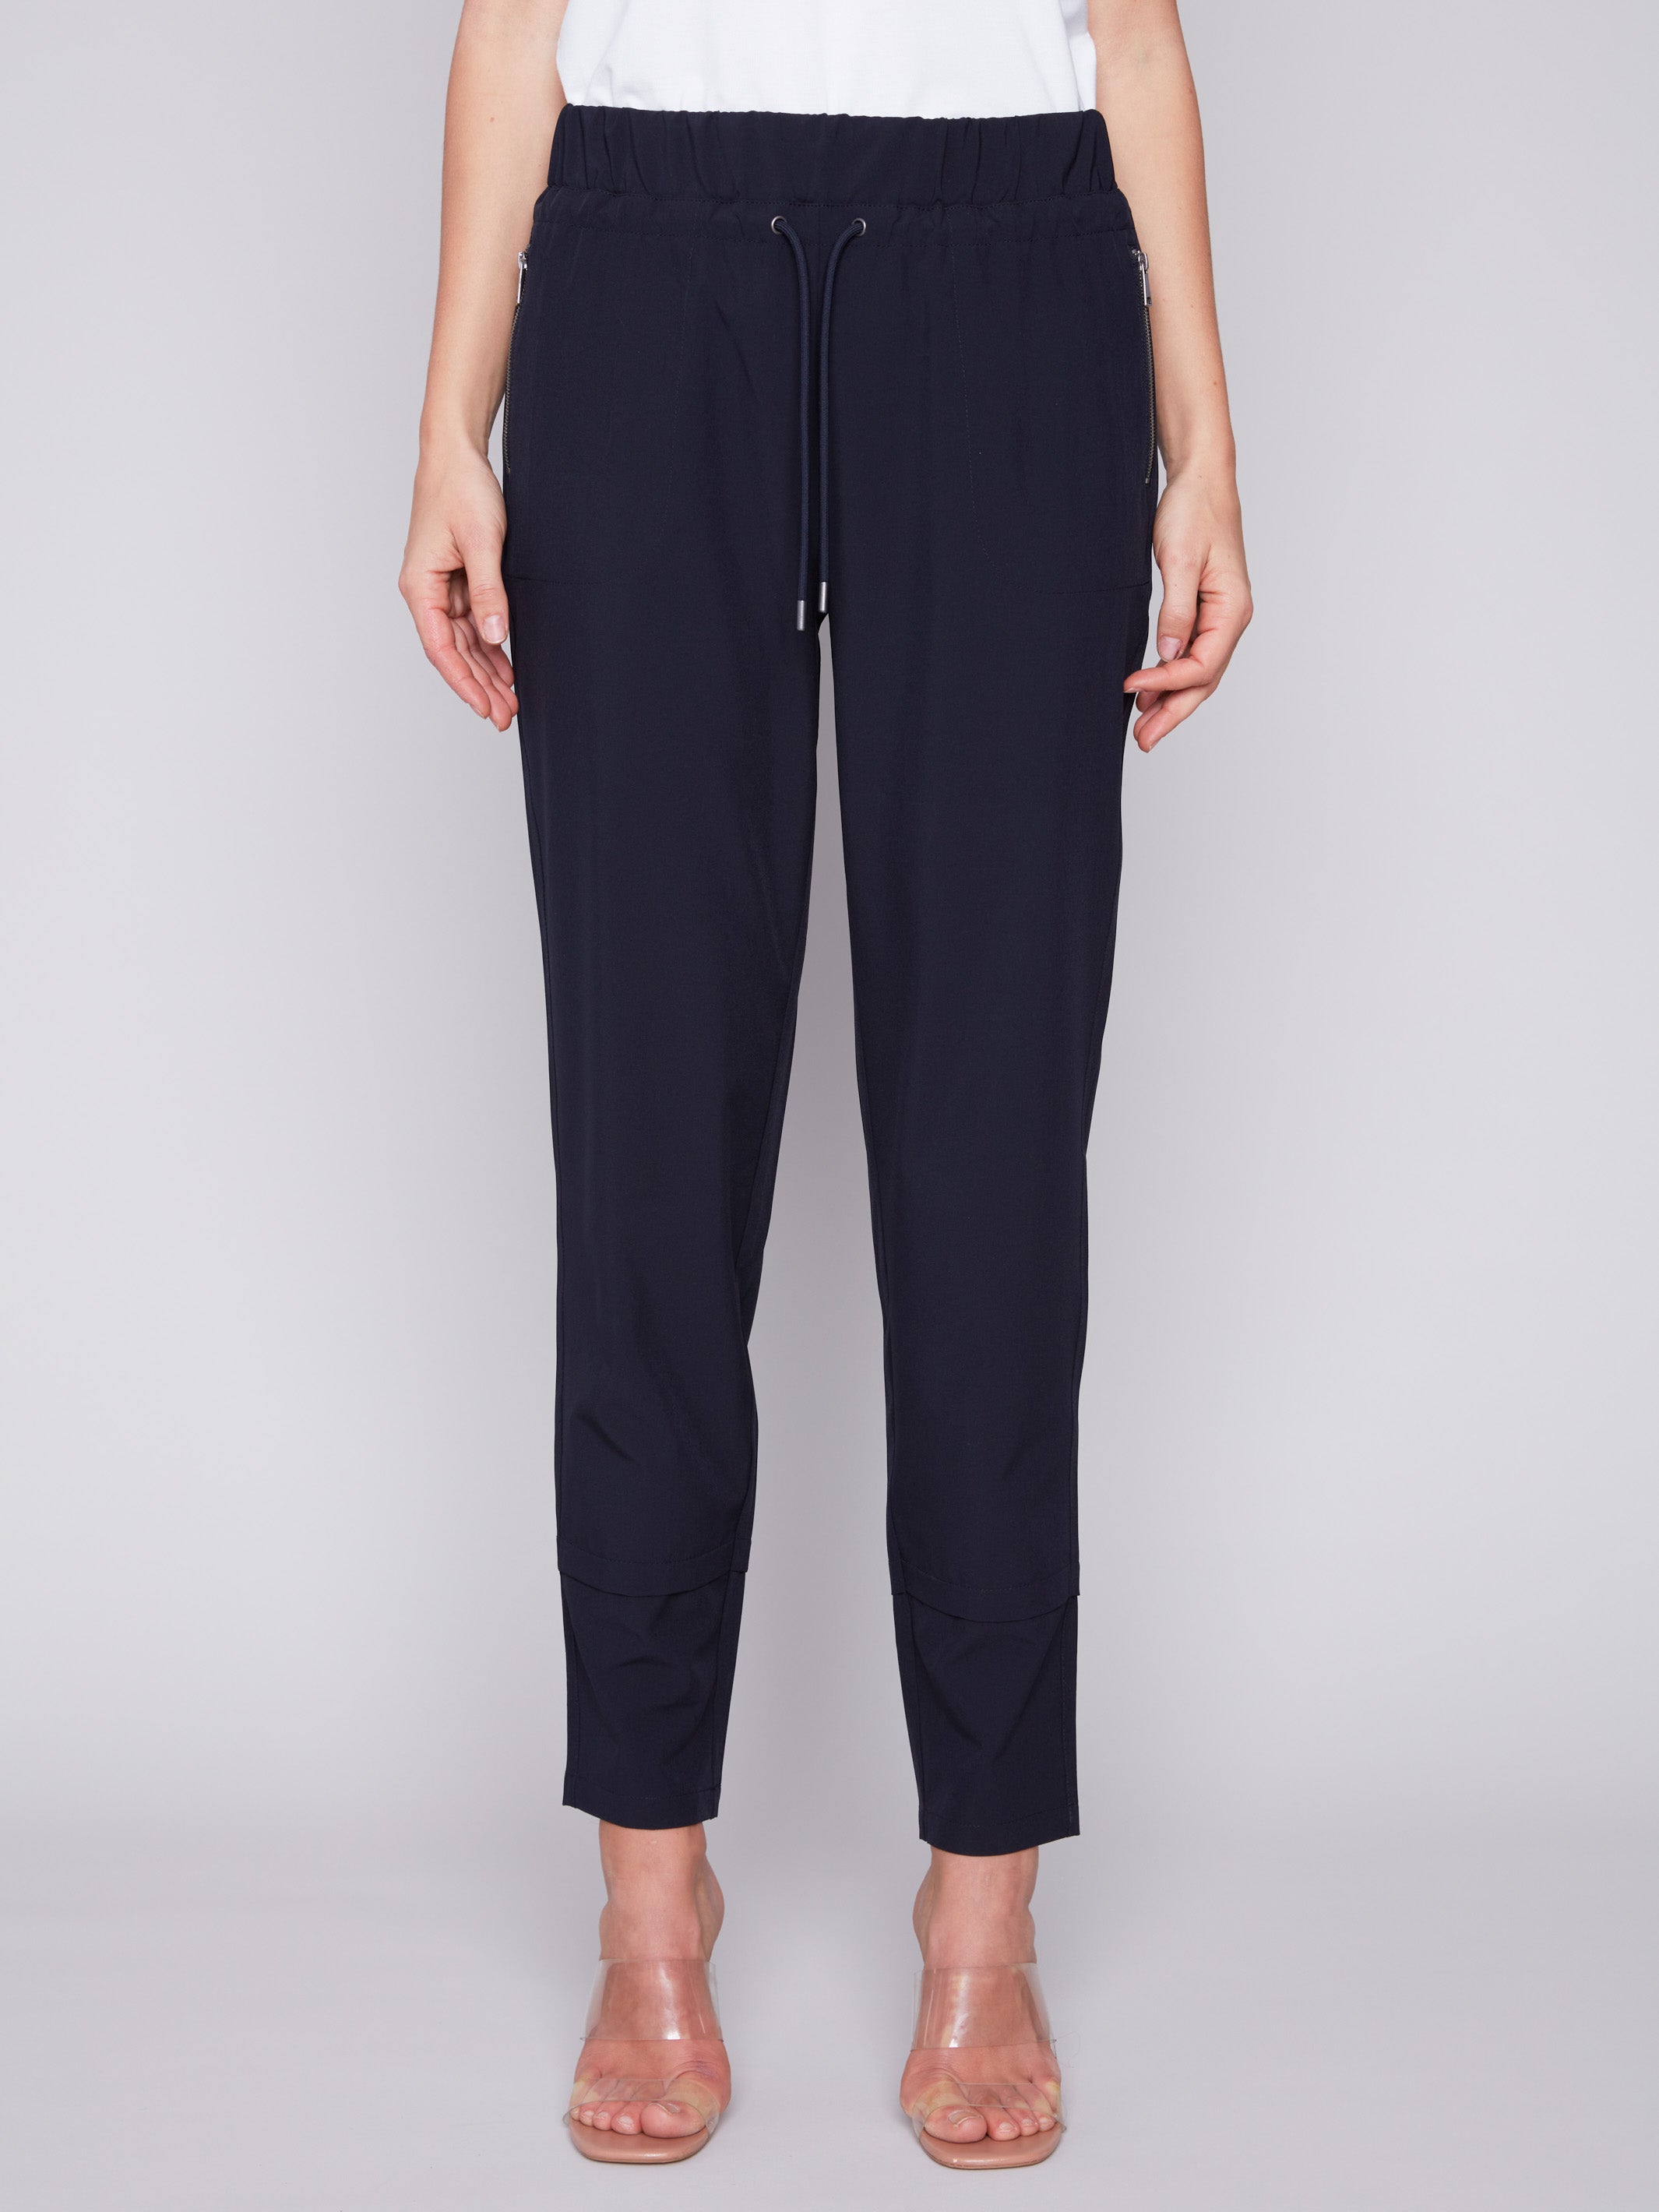 Techno Pants - Navy - Charlie B Collection Canada - Image 2